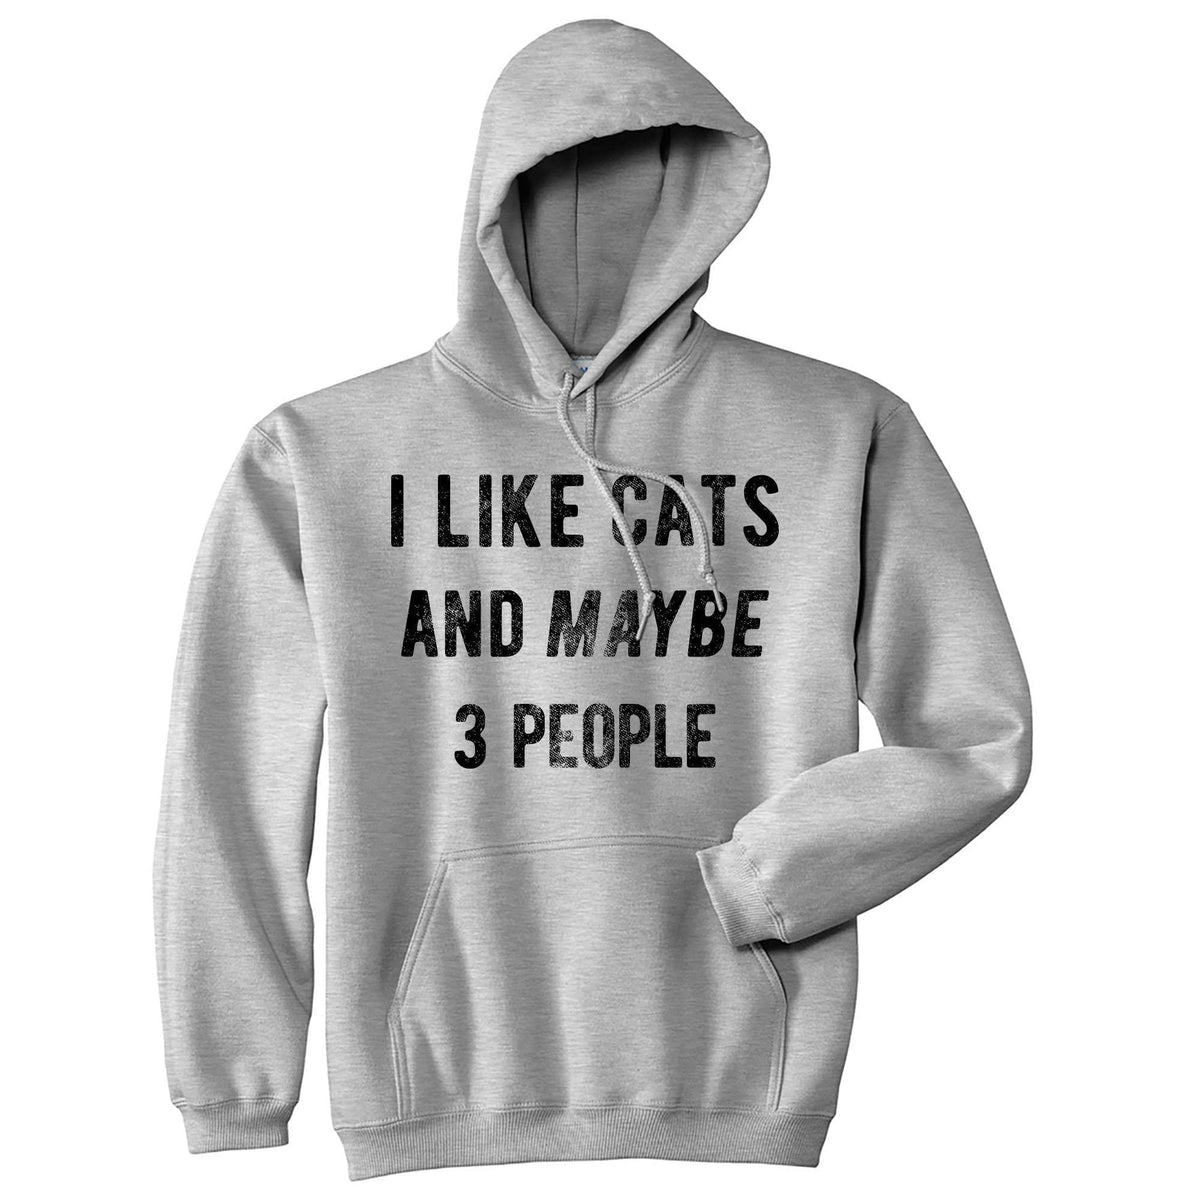 I Like Cats And Maybe 3 People Hoodie - Crazy Dog T-Shirts